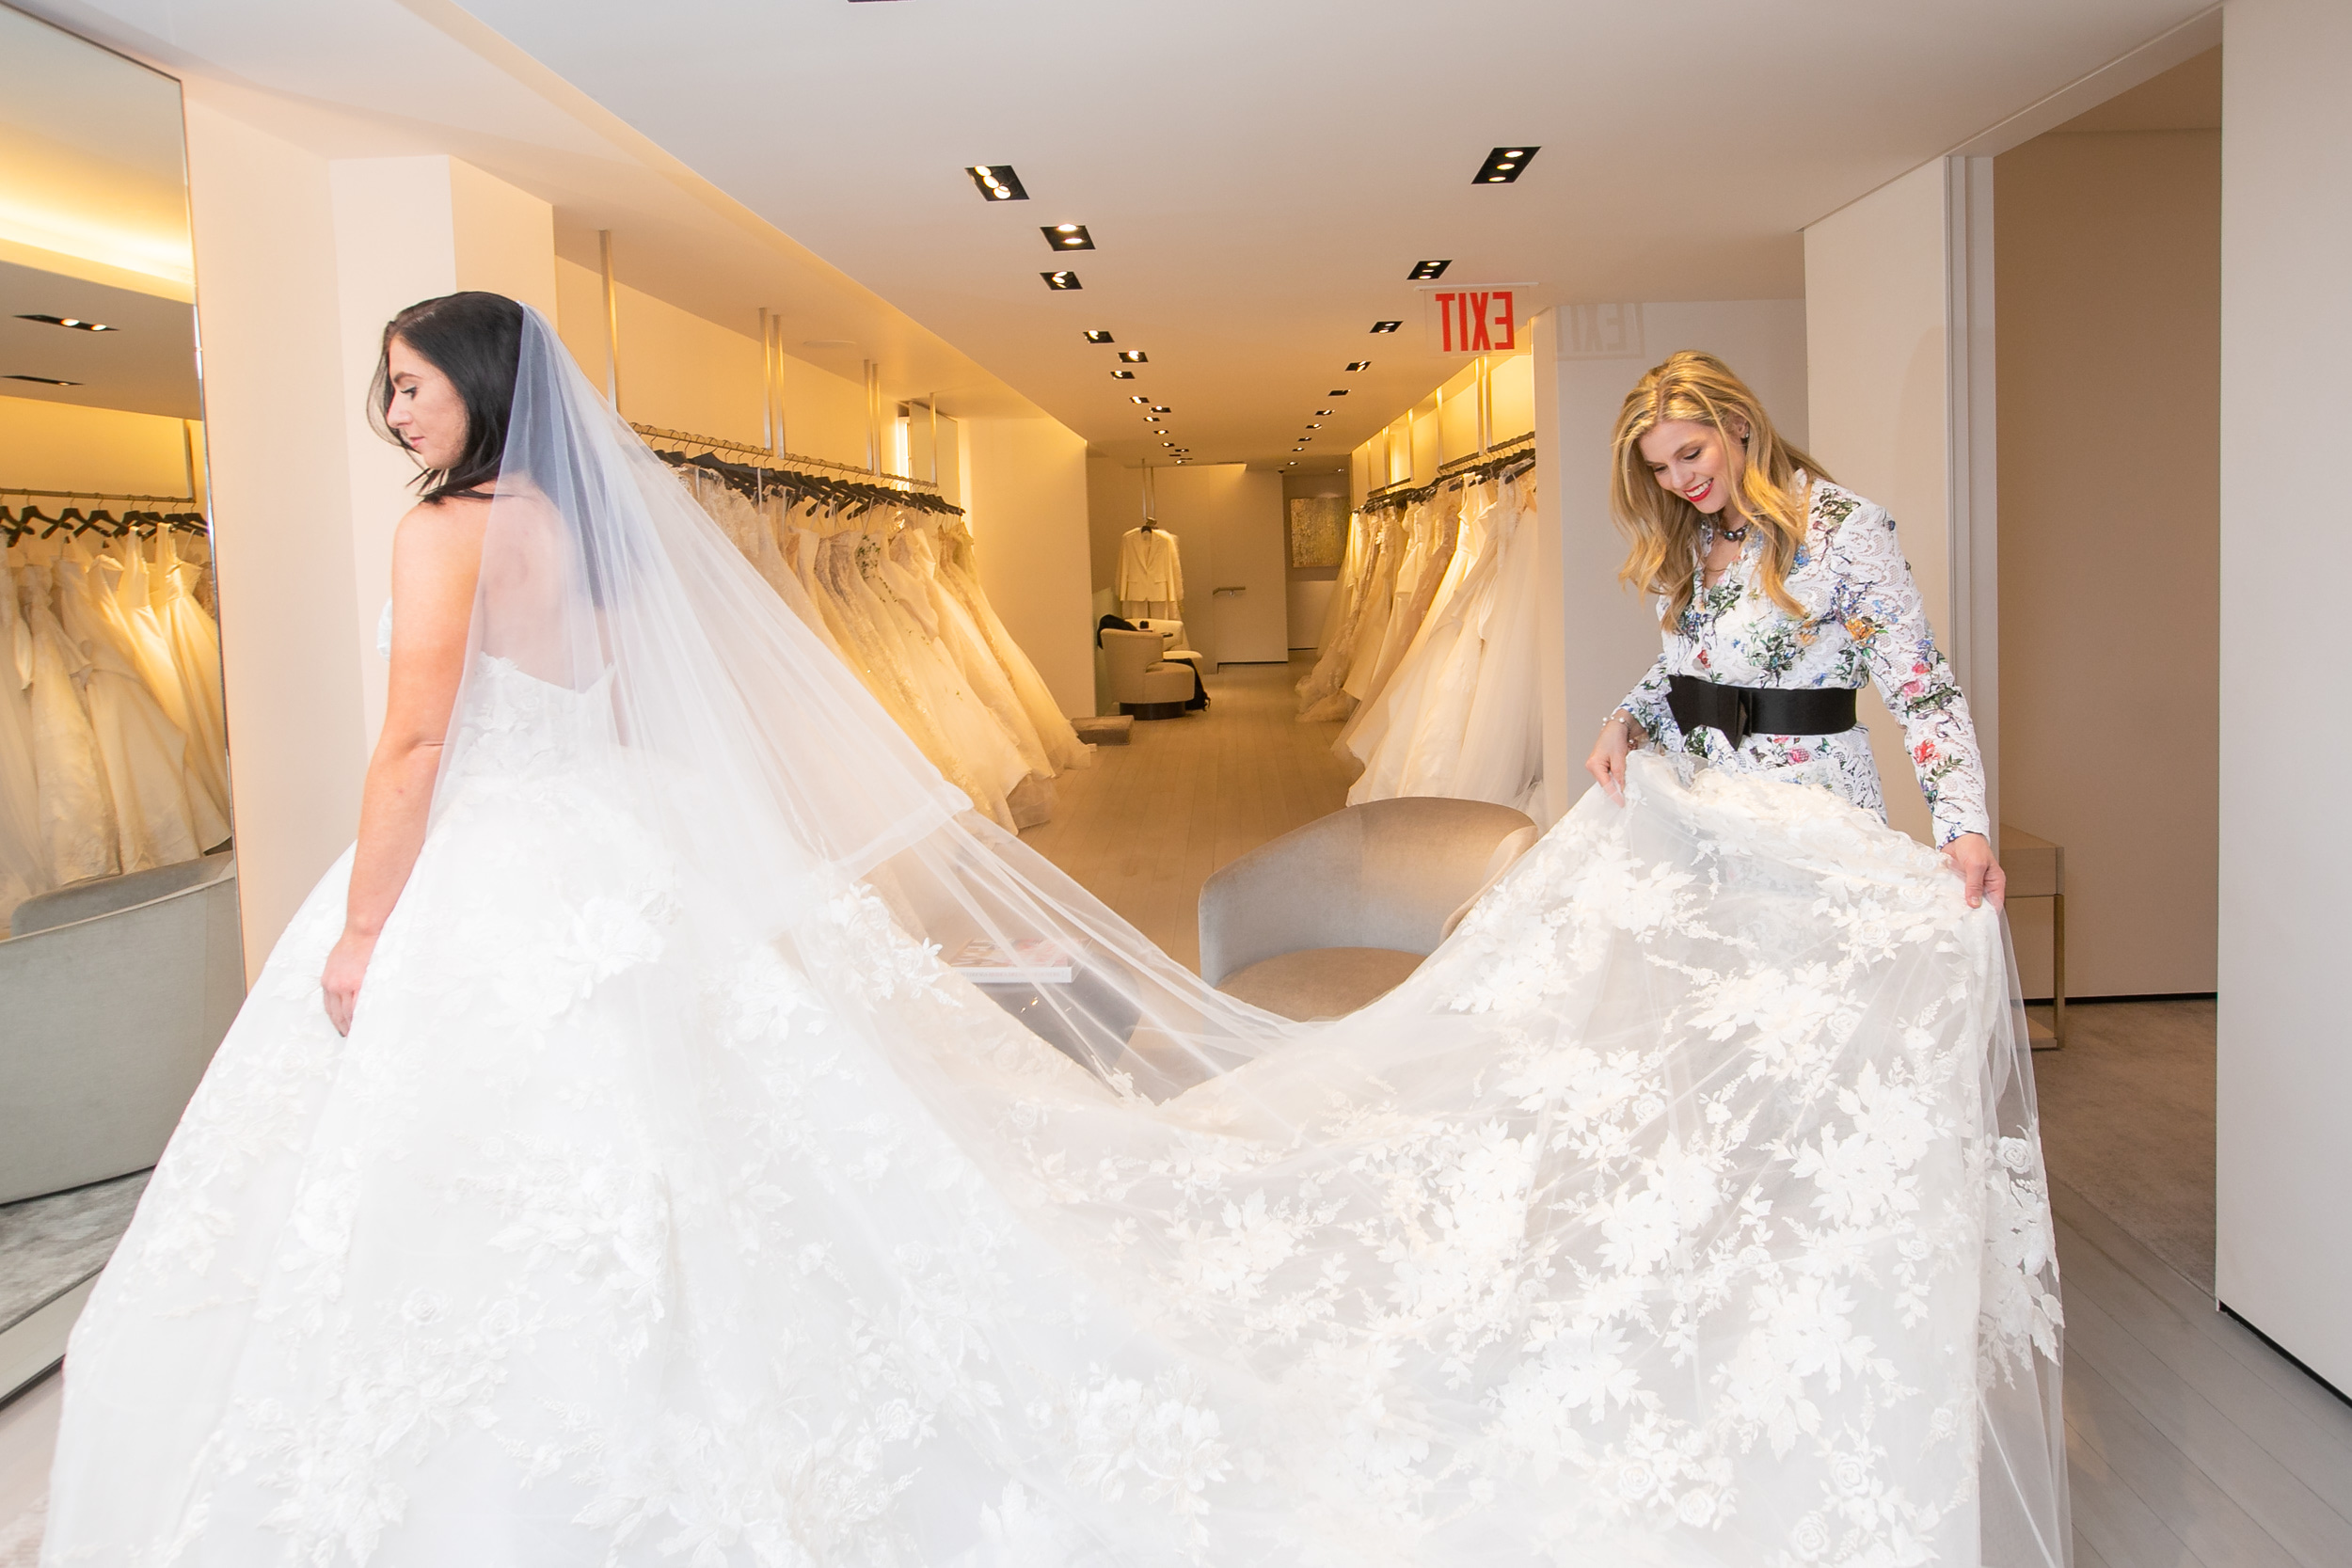 What to Expect When Wedding Dress Shopping and How to Make the Most of Appointments